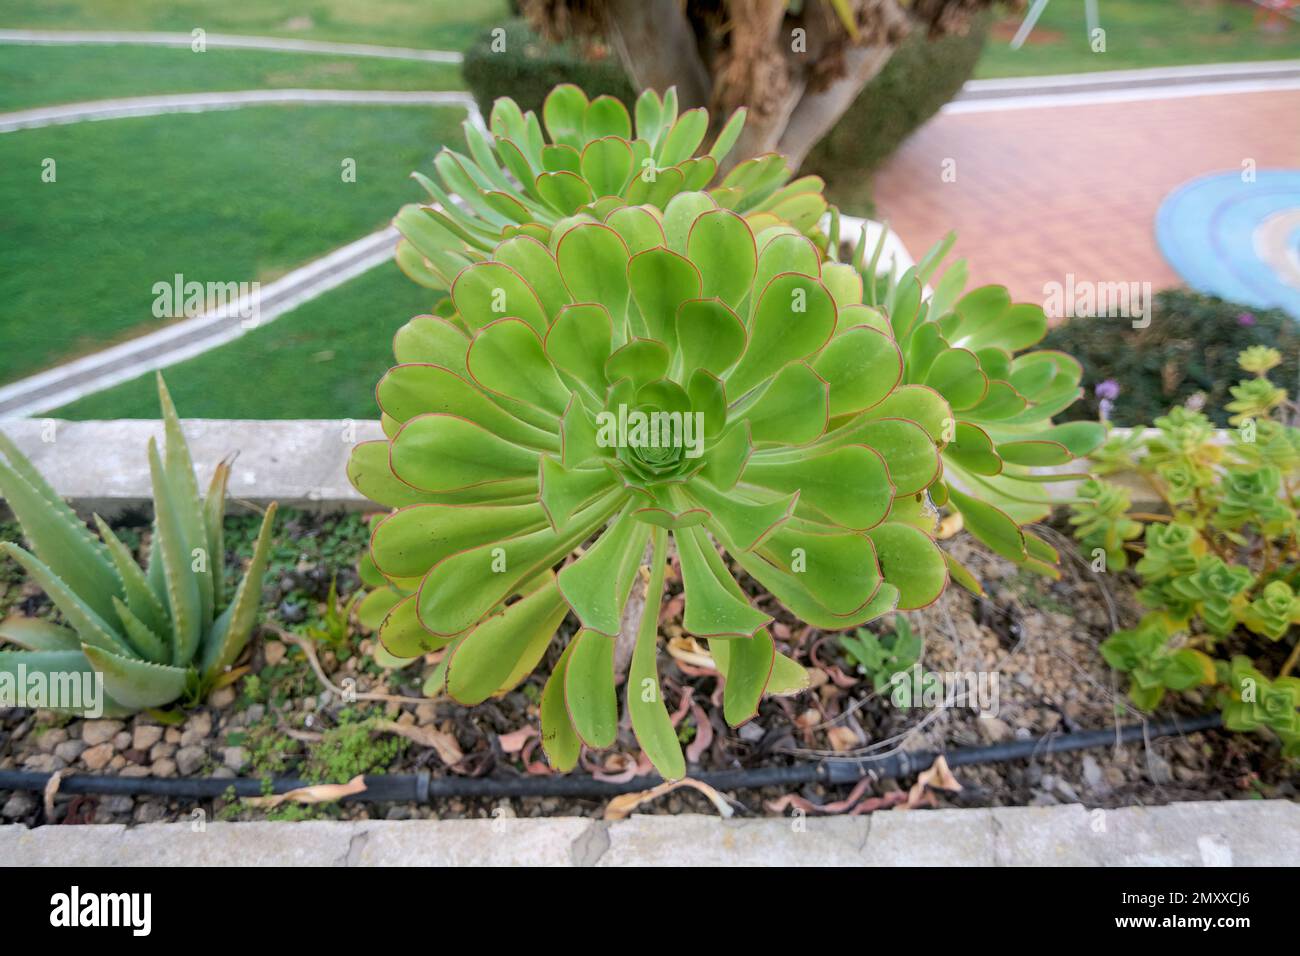 Close-up of Aeonium canariense growing in a container outdoors with two other plants Stock Photo